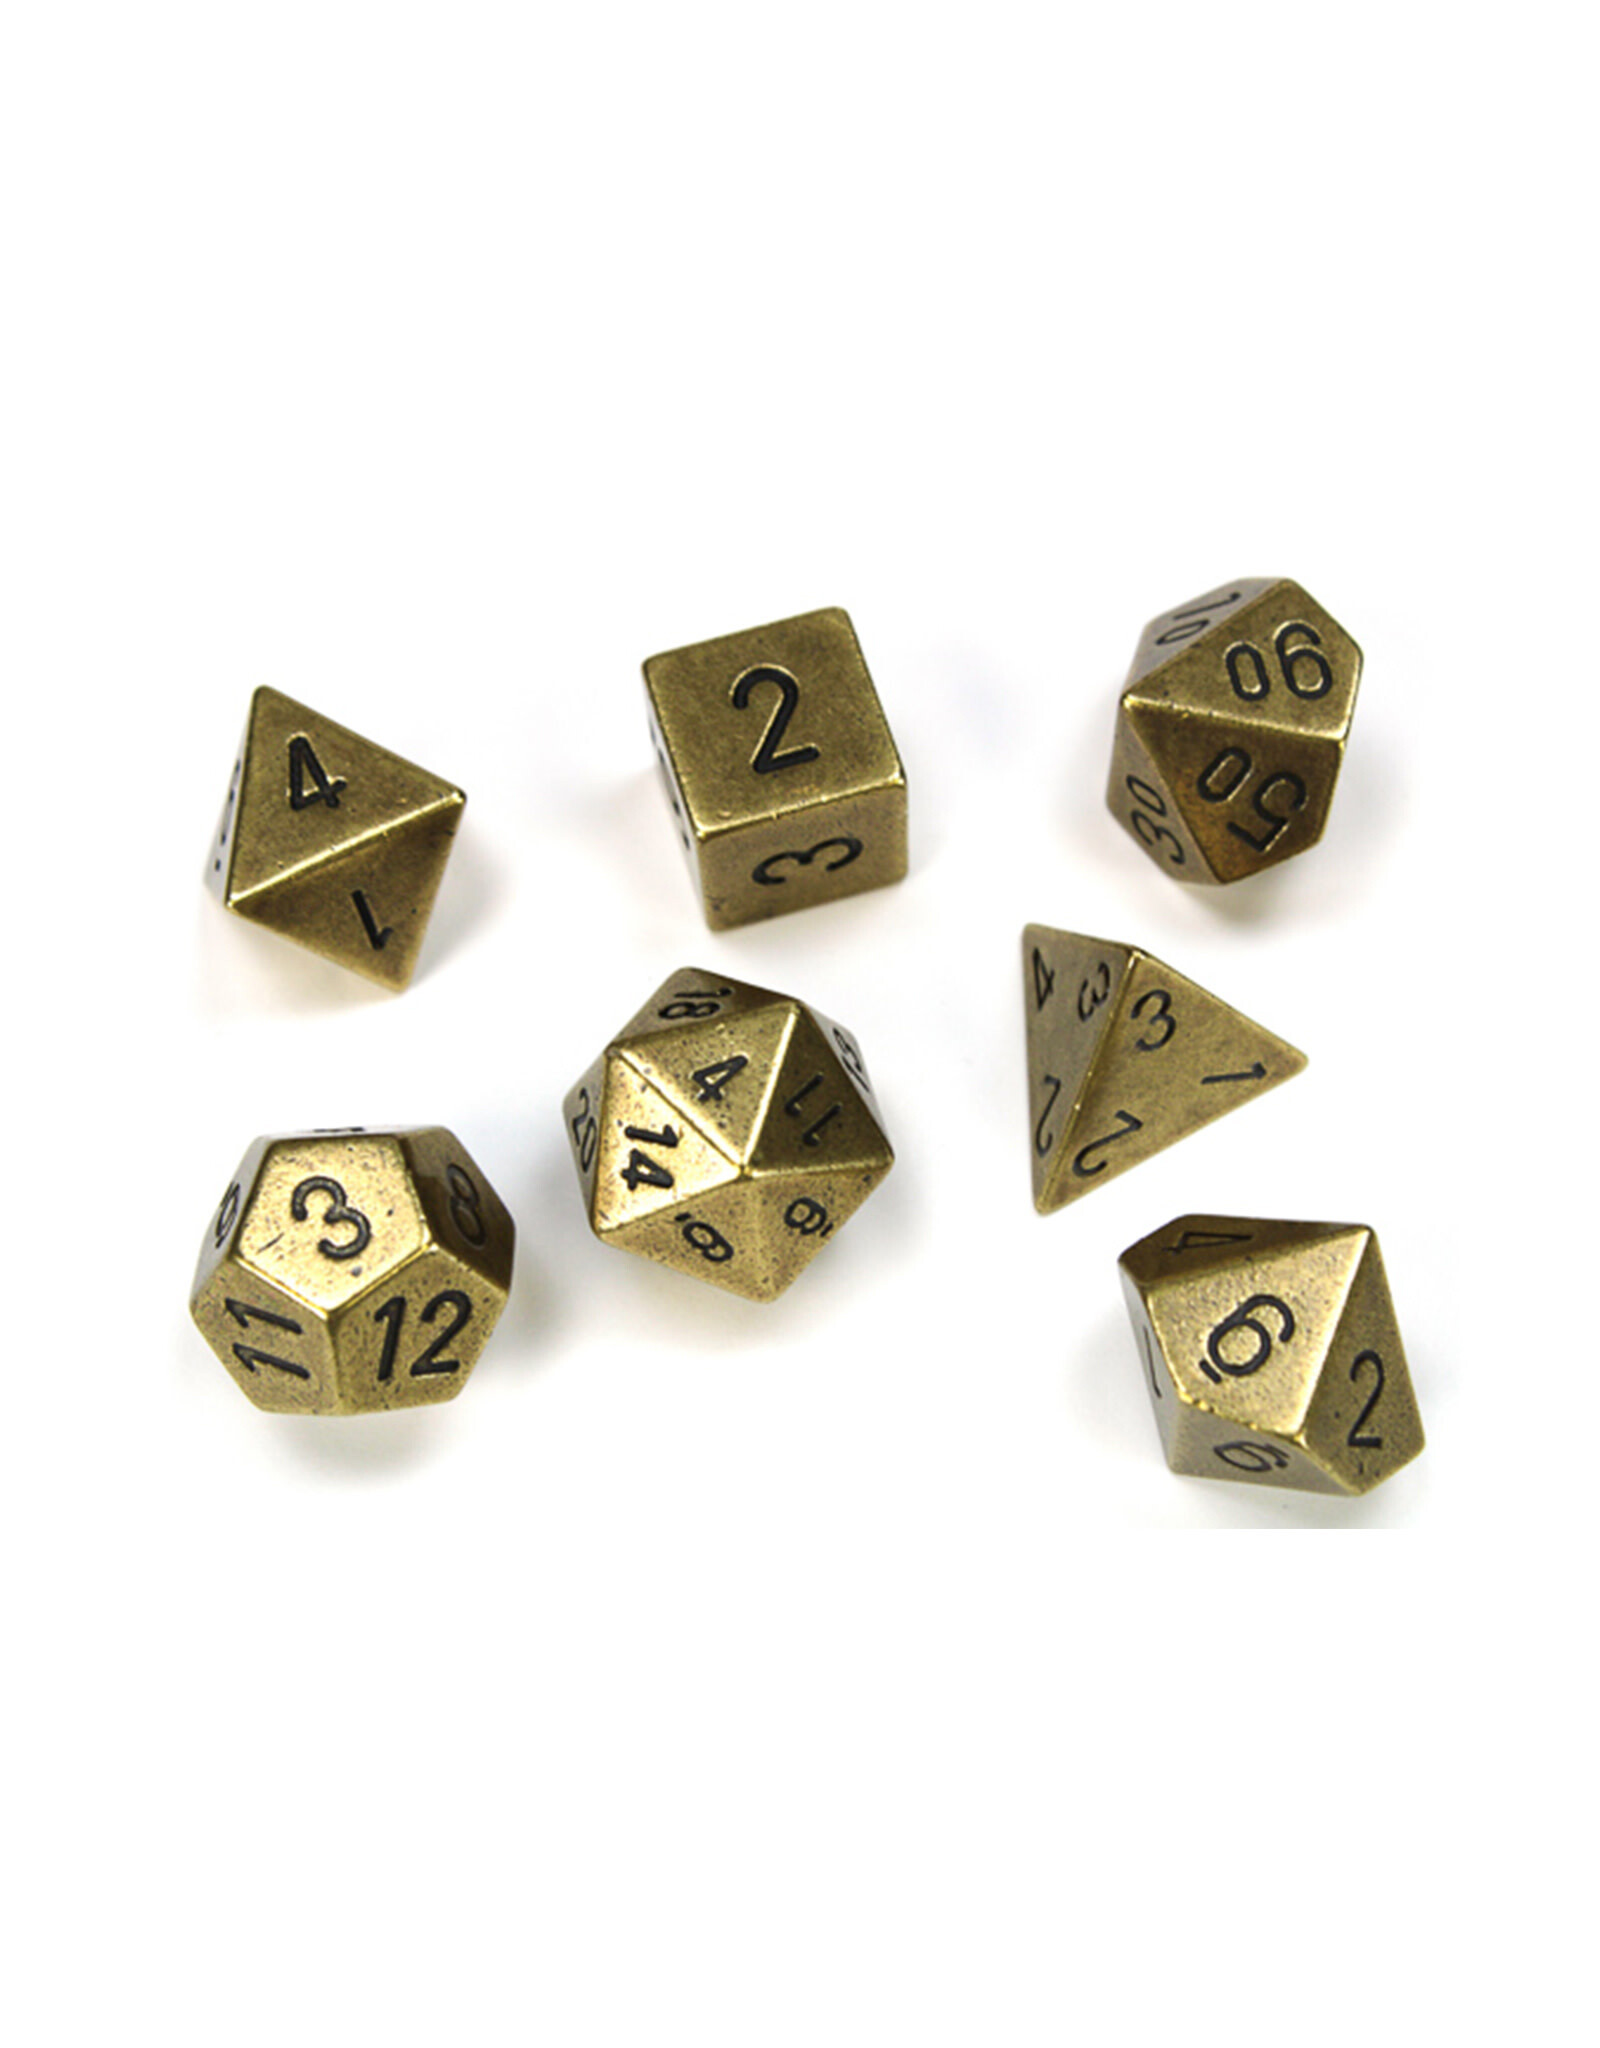 Chessex Chessex Solid Metal Old Brass Color Polyhedral 7 Dice Set